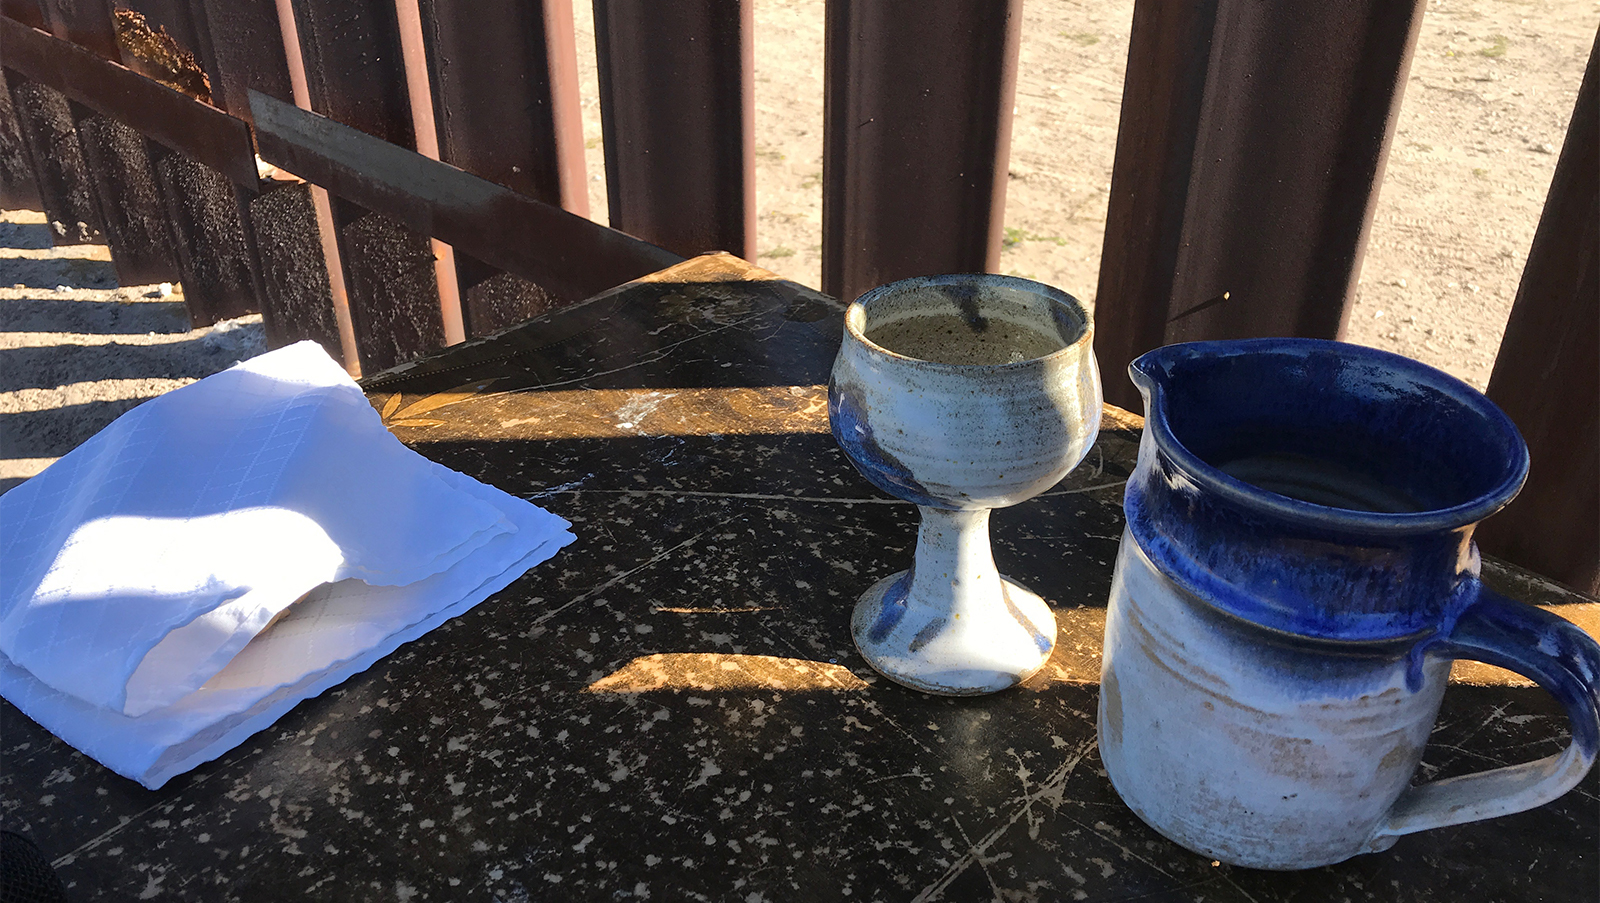 Communion Table Set Up at the Border Wall in Sunland Park, NM in November 2018. 